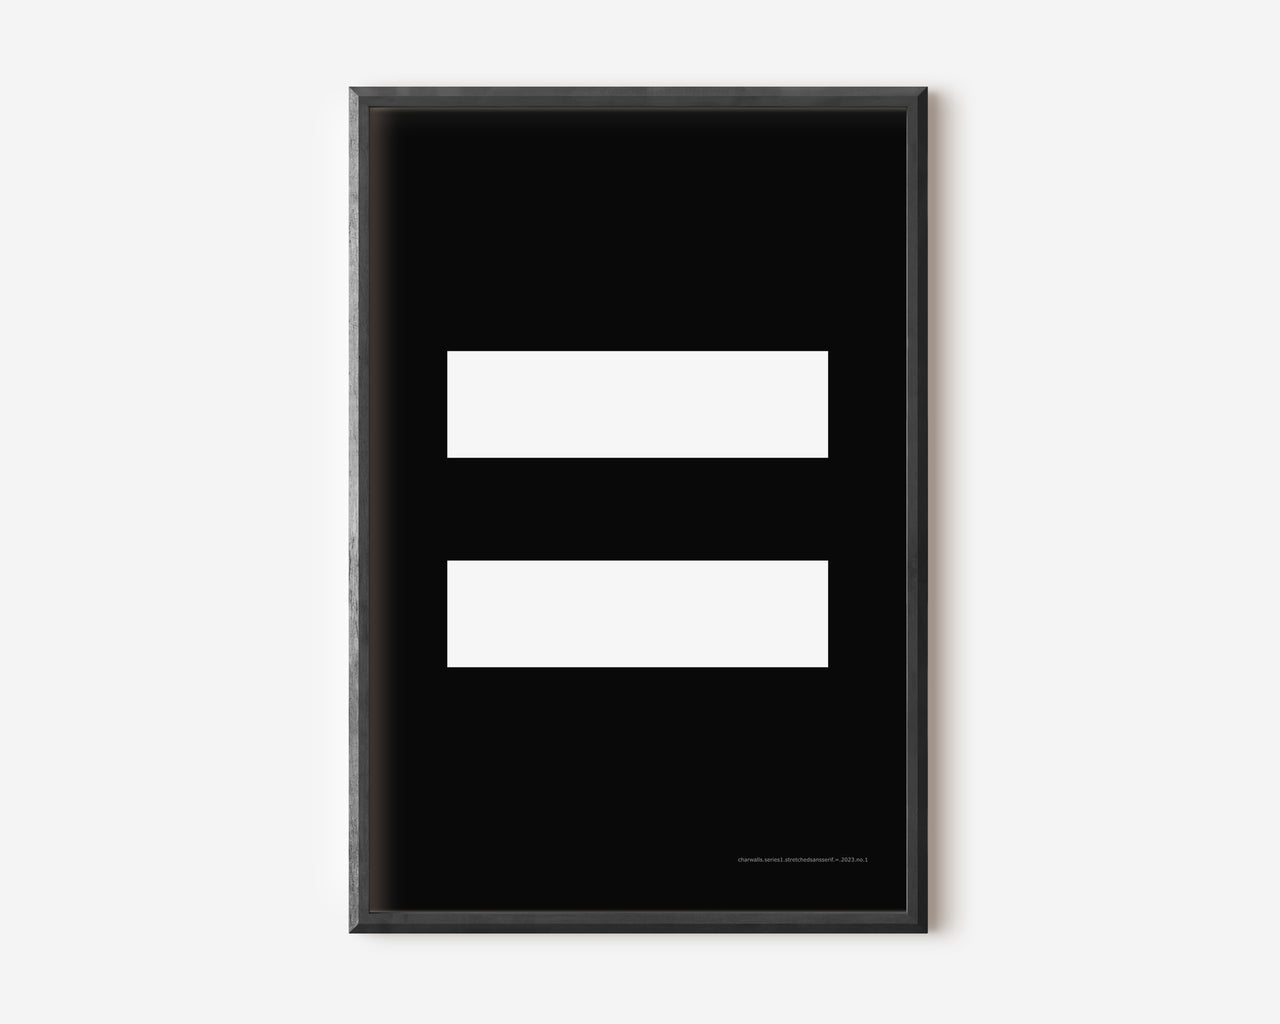 Modern symbol art print with a white equals sign on a black background.